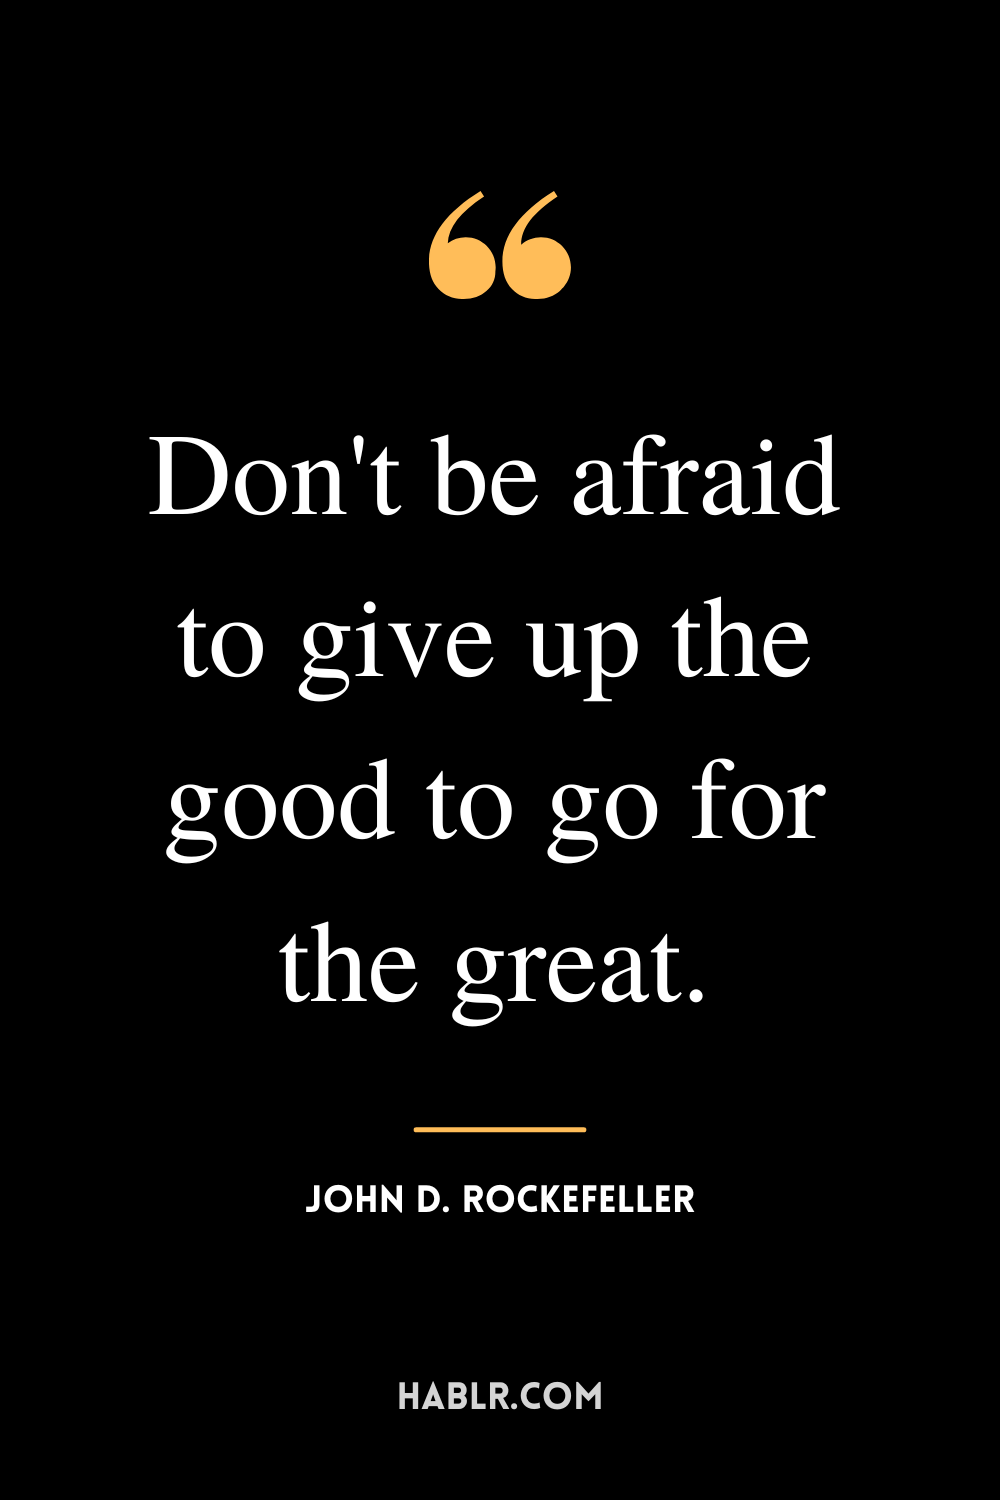 “Don't be afraid to give up the good to go for the great.” -John D. Rockefeller